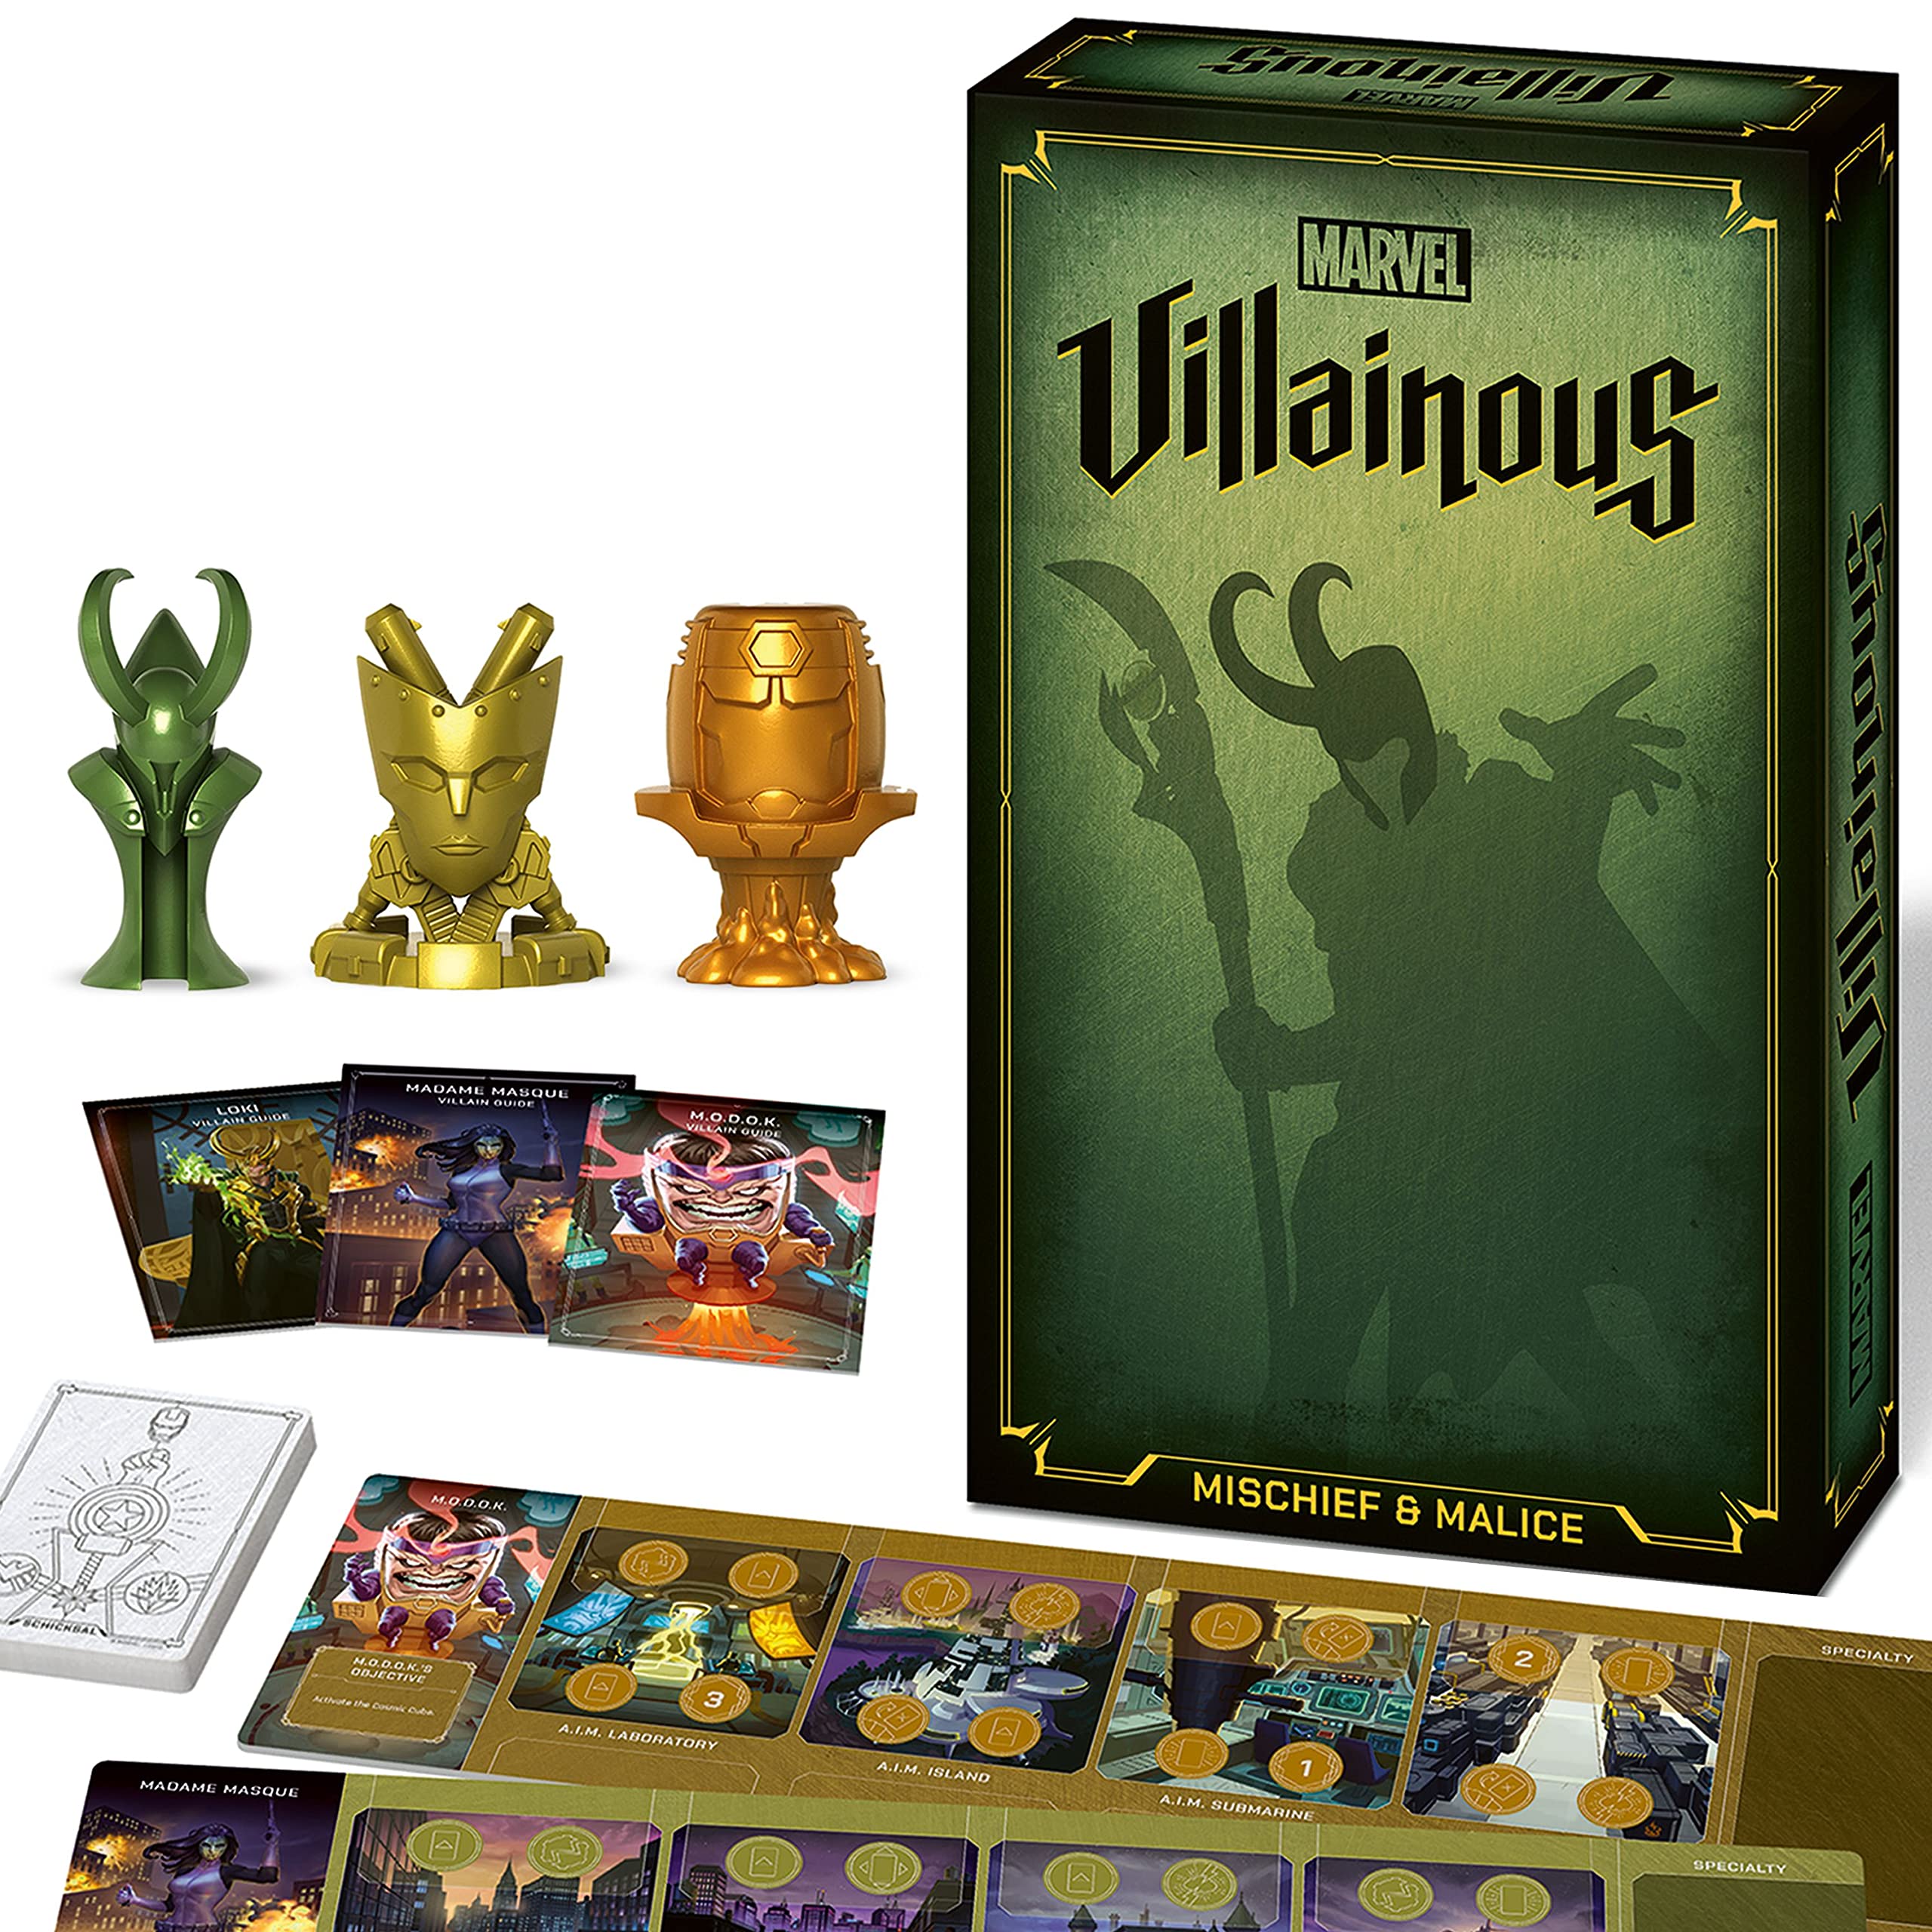 Ravensburger Marvel Villainous: Mischief & Malice Strategy Board Game, 2-5 players, for Ages 12 & Up – The First Marvel Villainous Expandalone